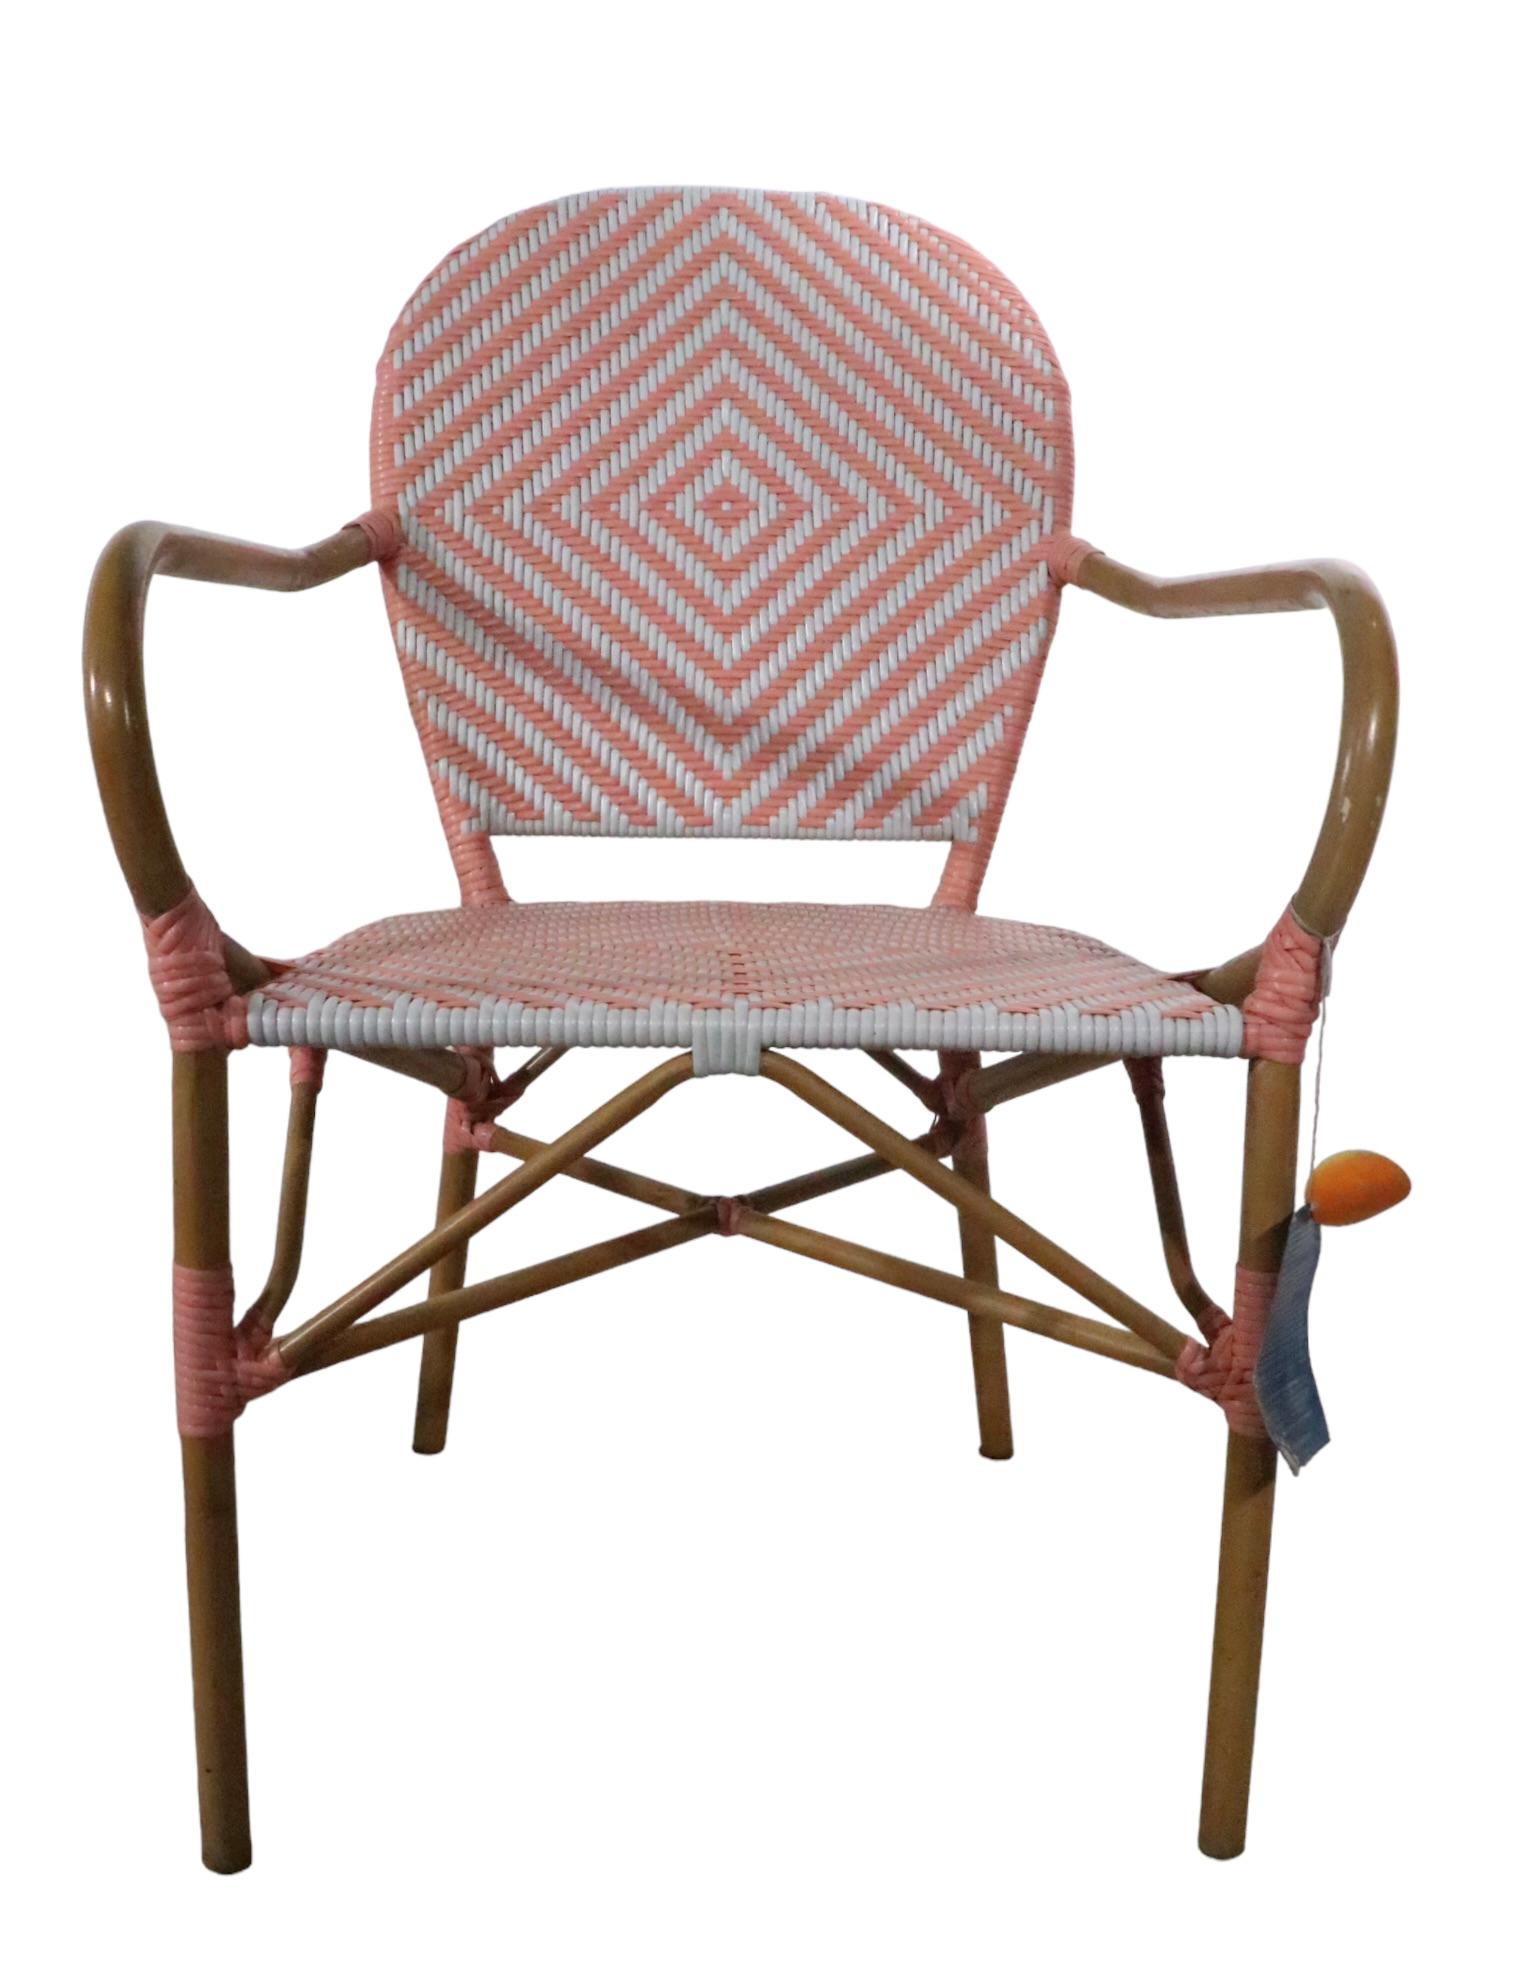 Pr. charming French Bistro, Cafe style arm chairs, one in pink, one in blue. The chairs have metal faux bamboo frames, with woven seats and back rests. Both are in very good original, clean and ready to use condition. Made in China, Imported for